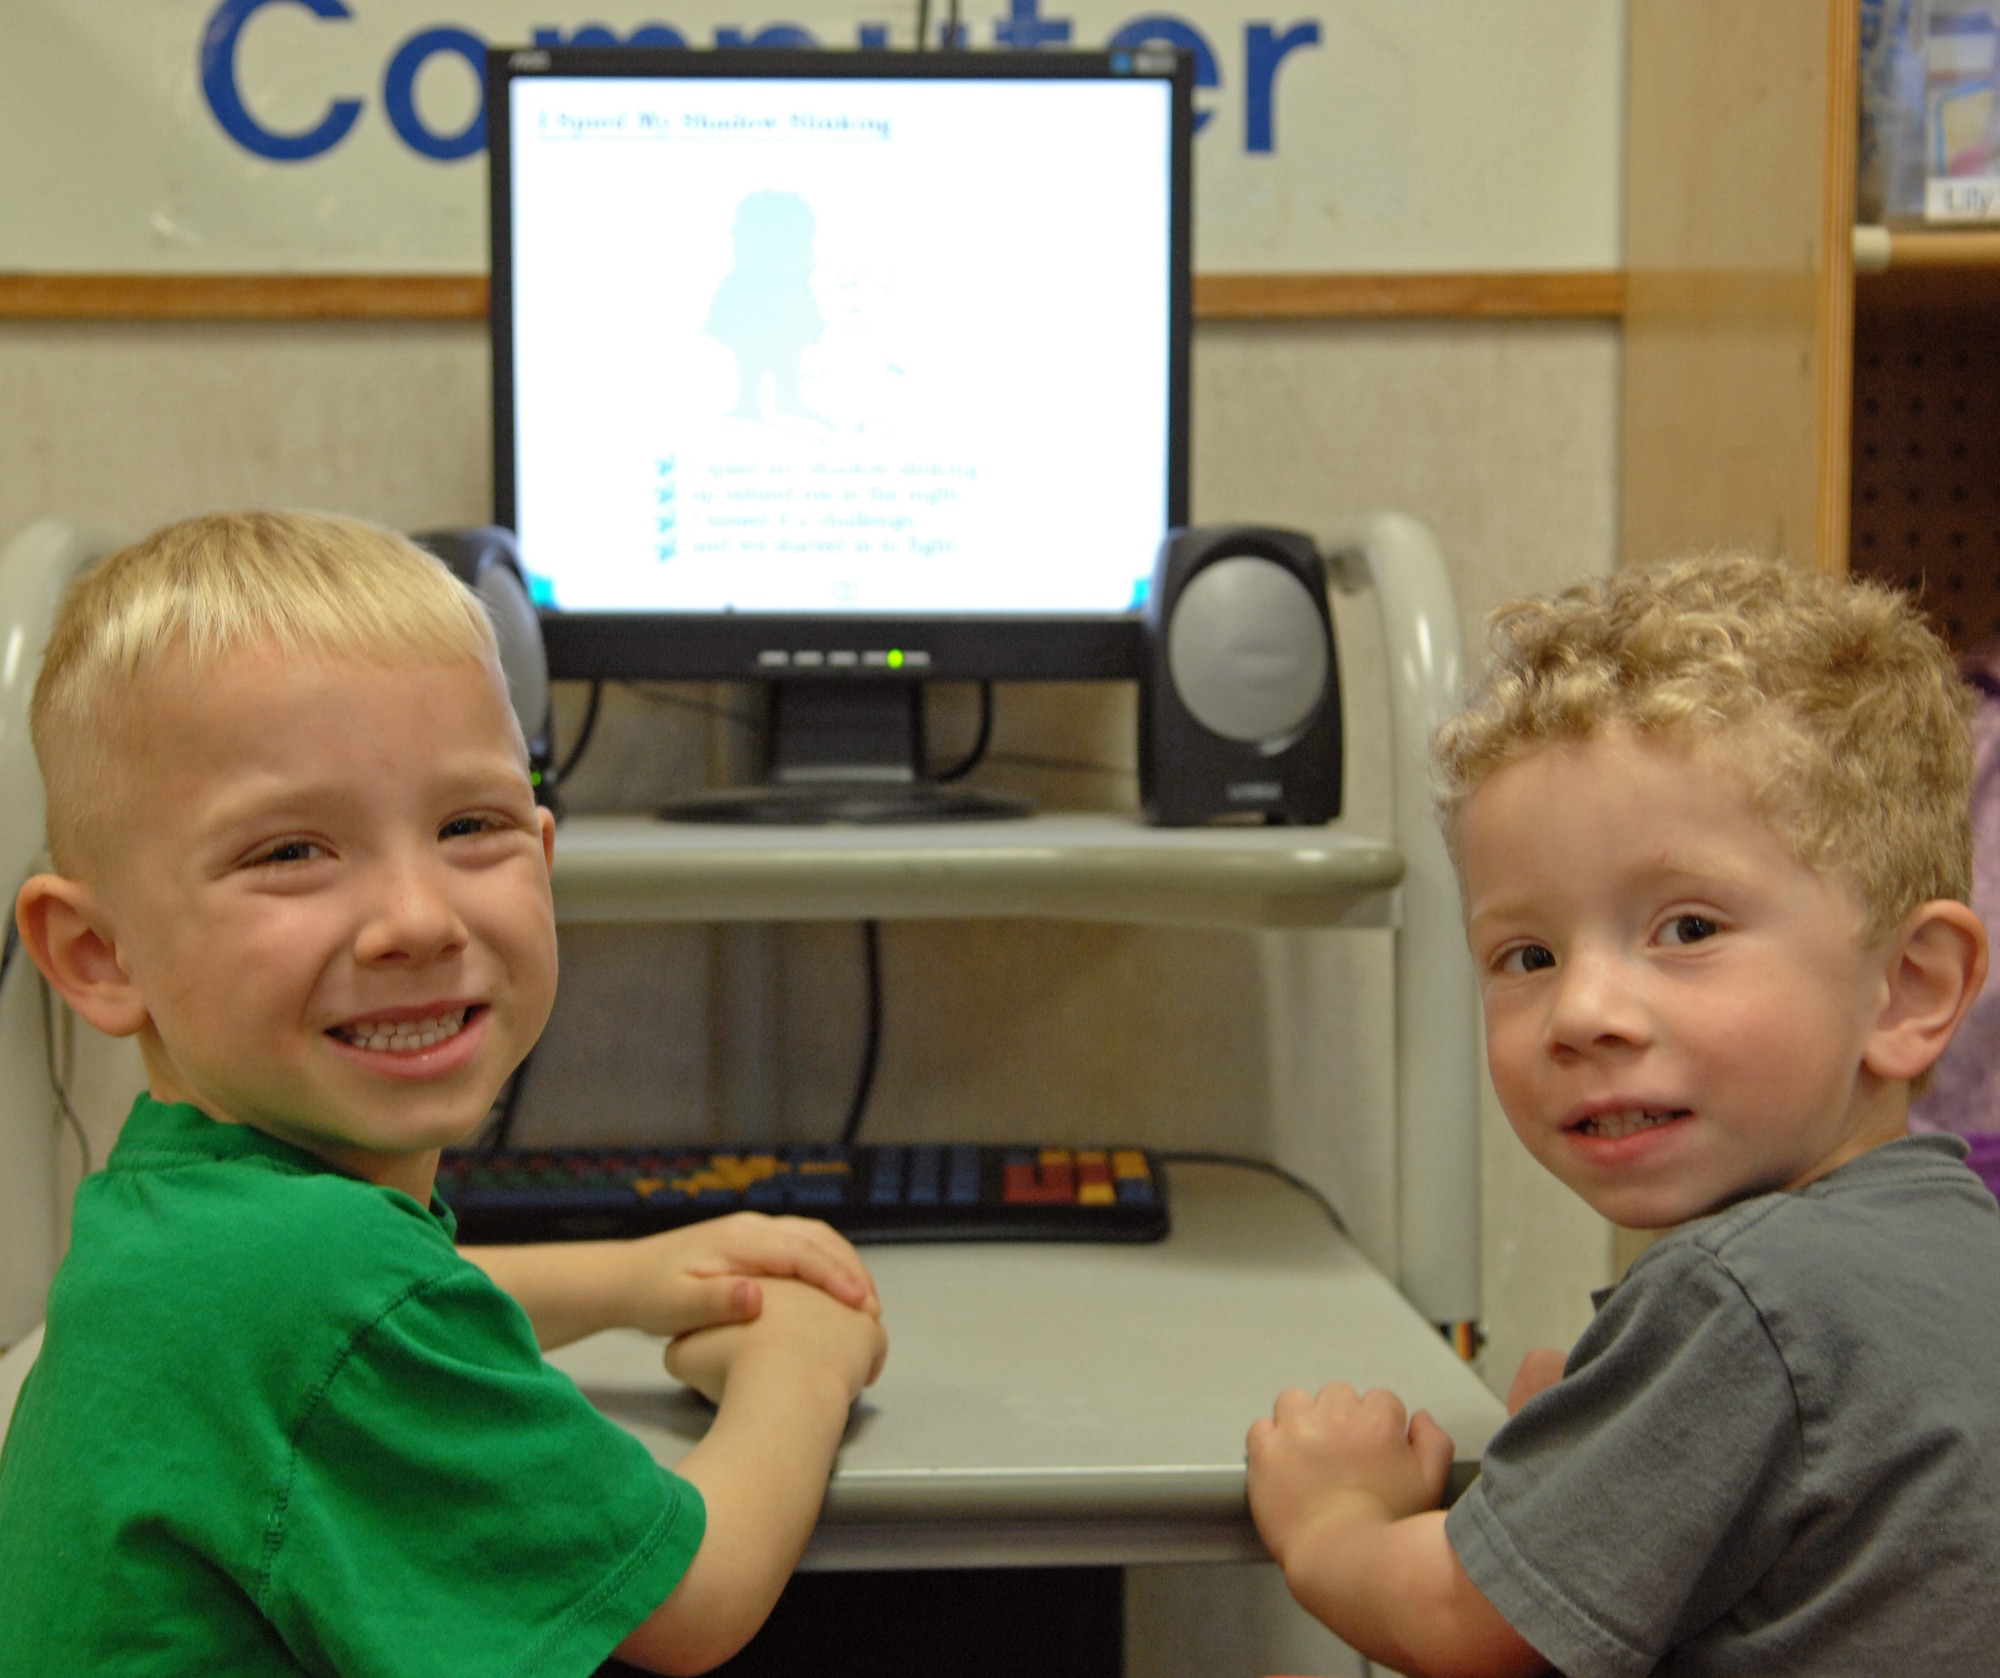 Kyle Konicki , 4, son of Master Sergeants Jeremy and Kristi Konicki and Isaac Gunter, 3, son of Tech. Sergeants Robert and Charita Gunter pose while watching a tutorial on the computer at the Child Development Center on Barksdale Air Force Base, La., Feb. 29. Konicki and Gunter were learning how to use the point and click game where they click on various objects to hear sounds and reveal hidden objects. (U.S. Air Force photo/Airman 1st Class Joseph A. Pagán Jr.)(RELEASED)